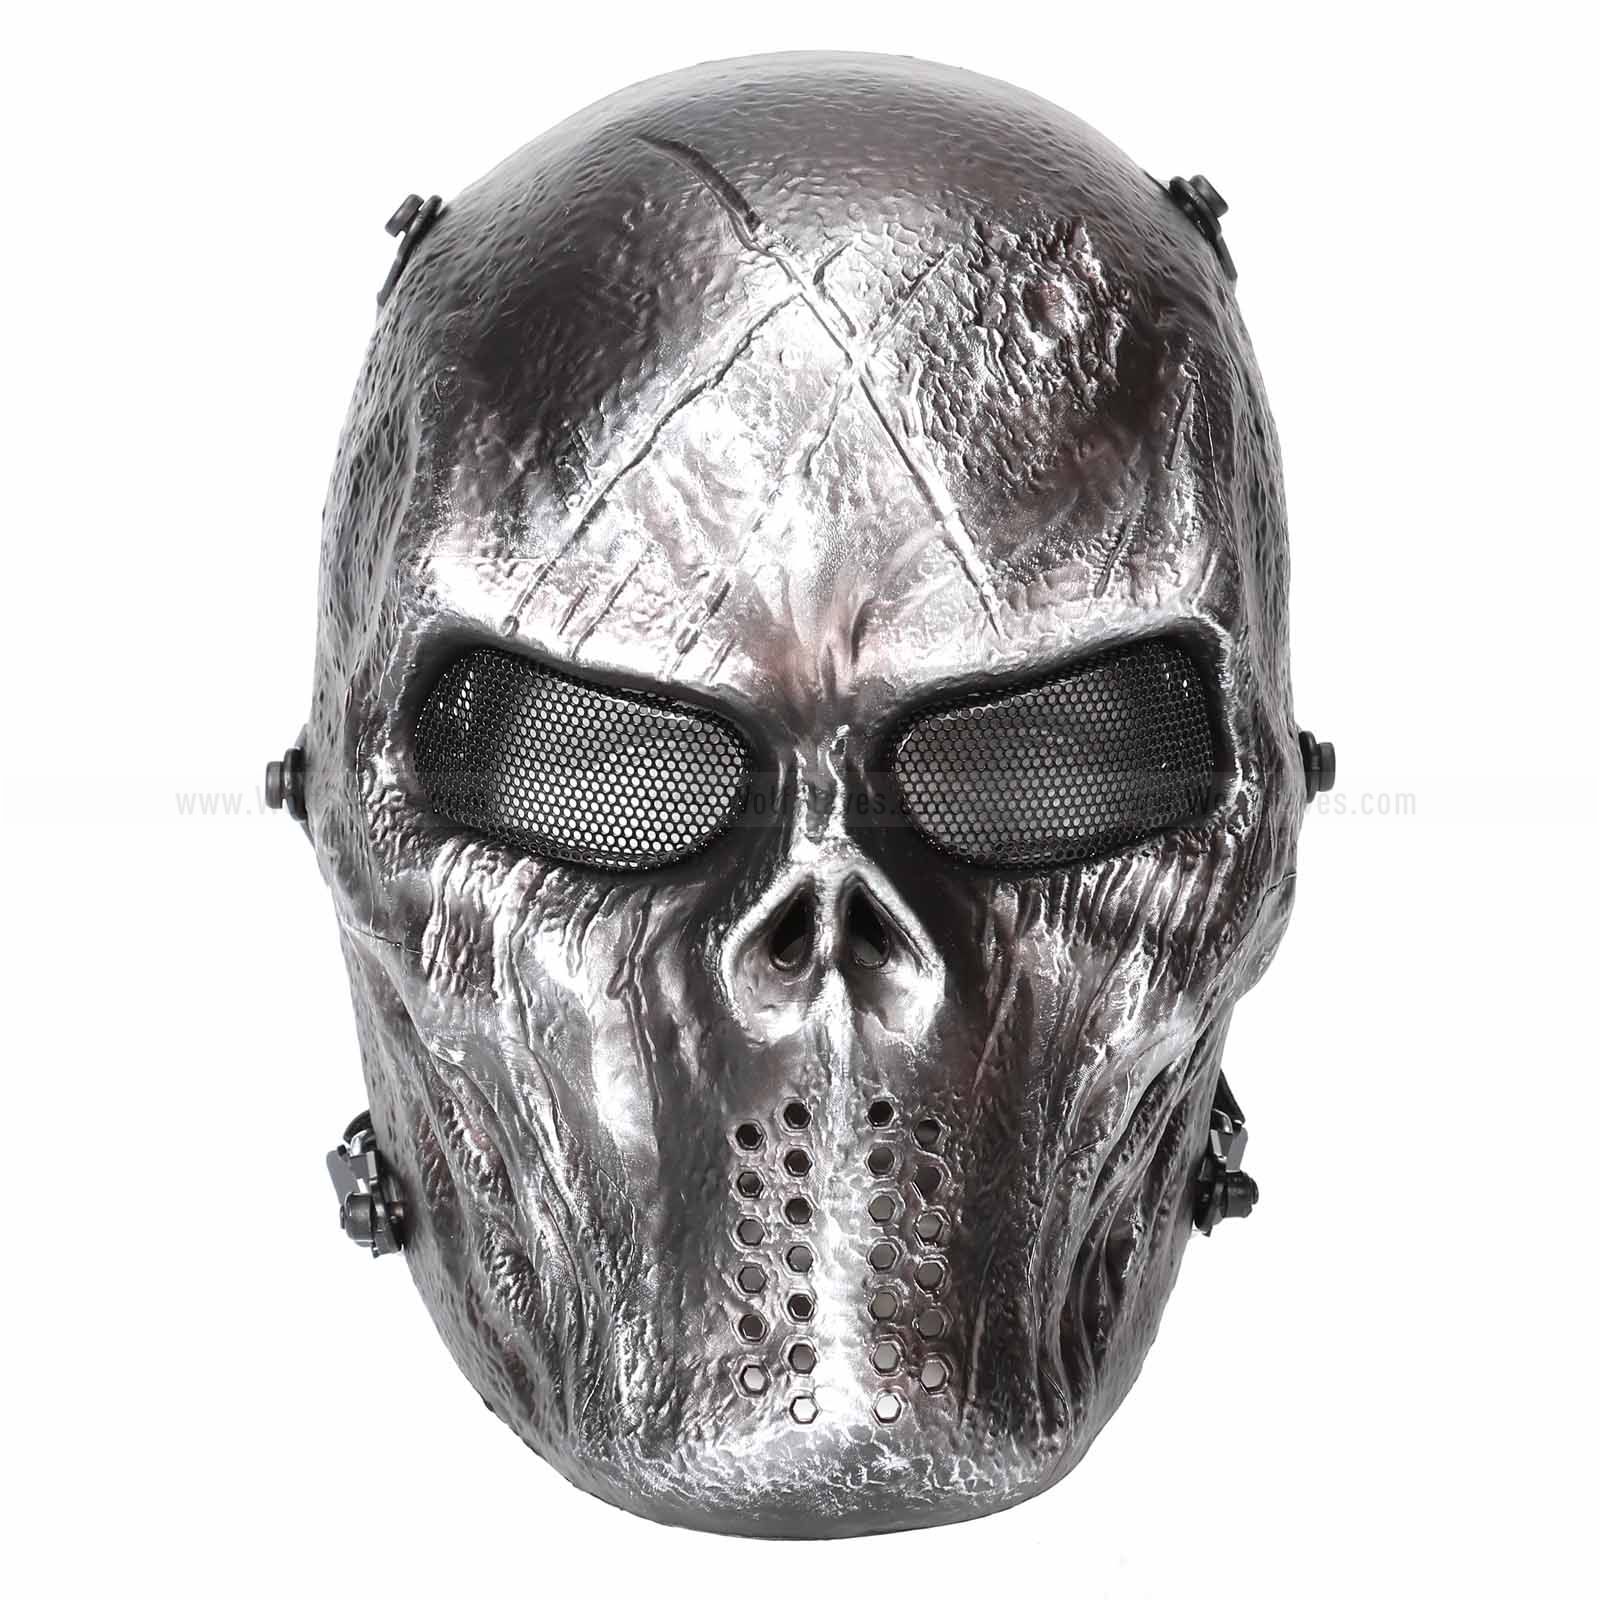 VF Halloween Face Shield Scary Skeleton Protection Wind Pollution Lovers Black Skull Cover 